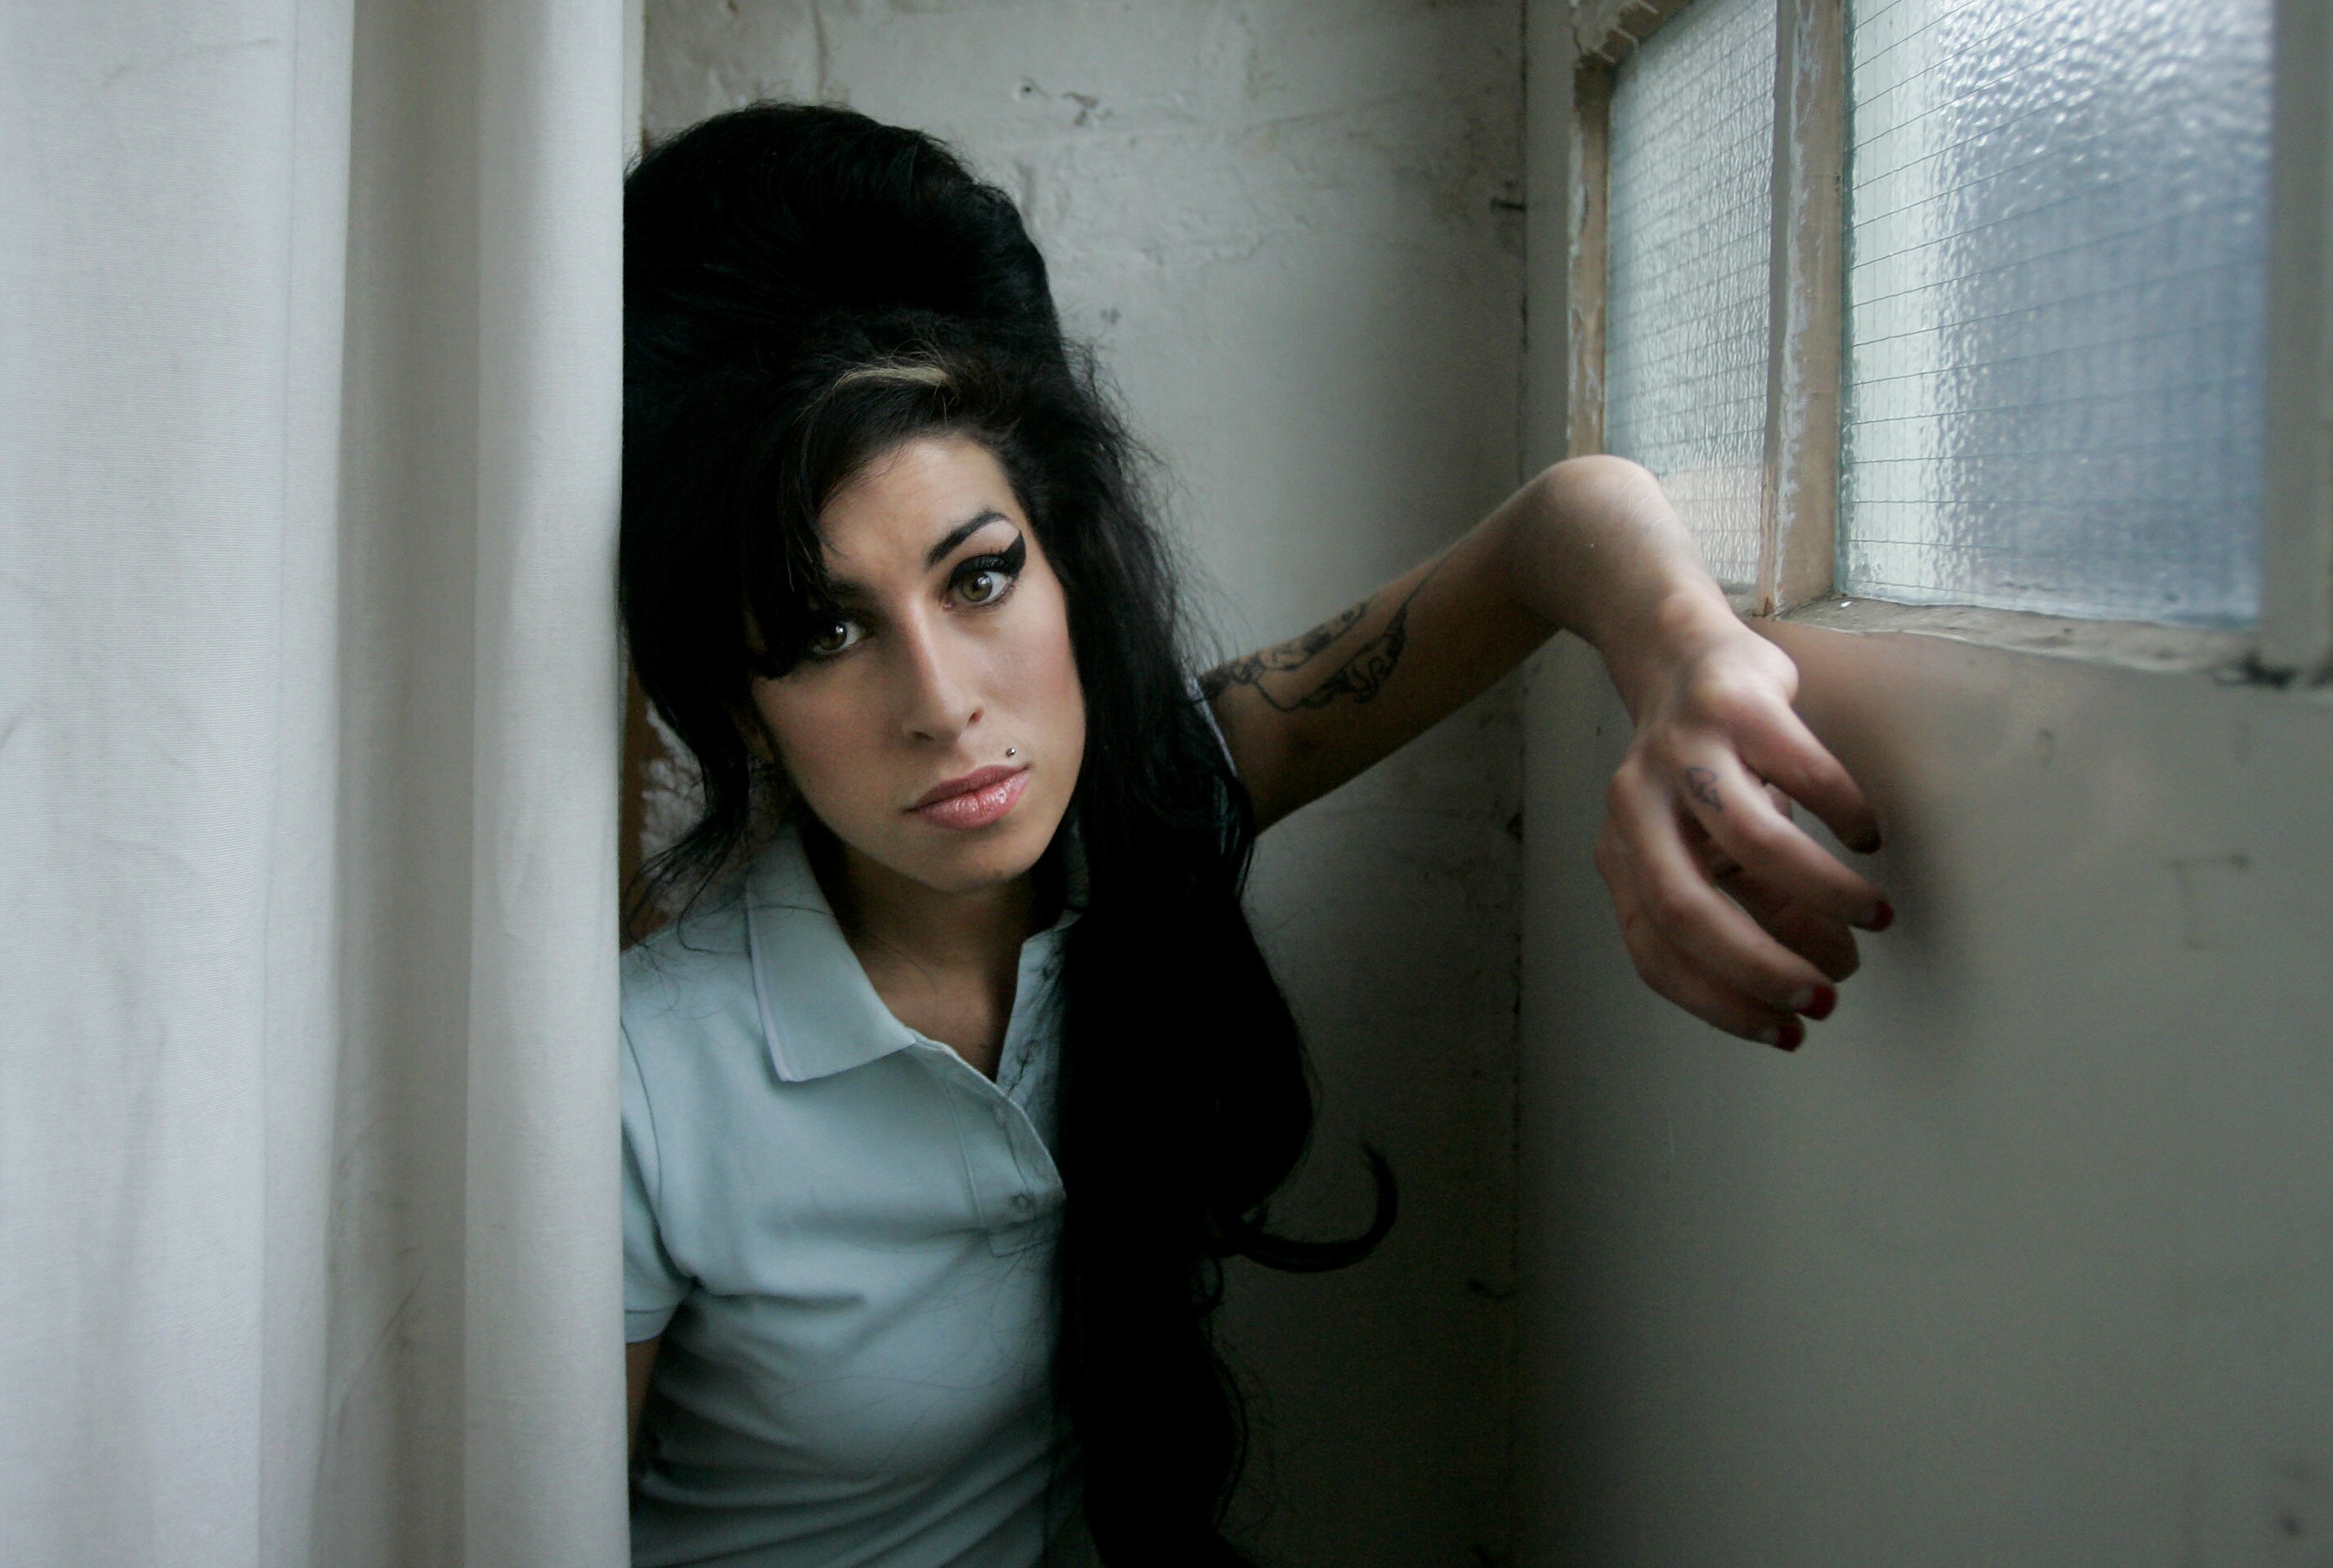 Amy Winehouse, dead at 27 — Profiles and reviews from the Post archives